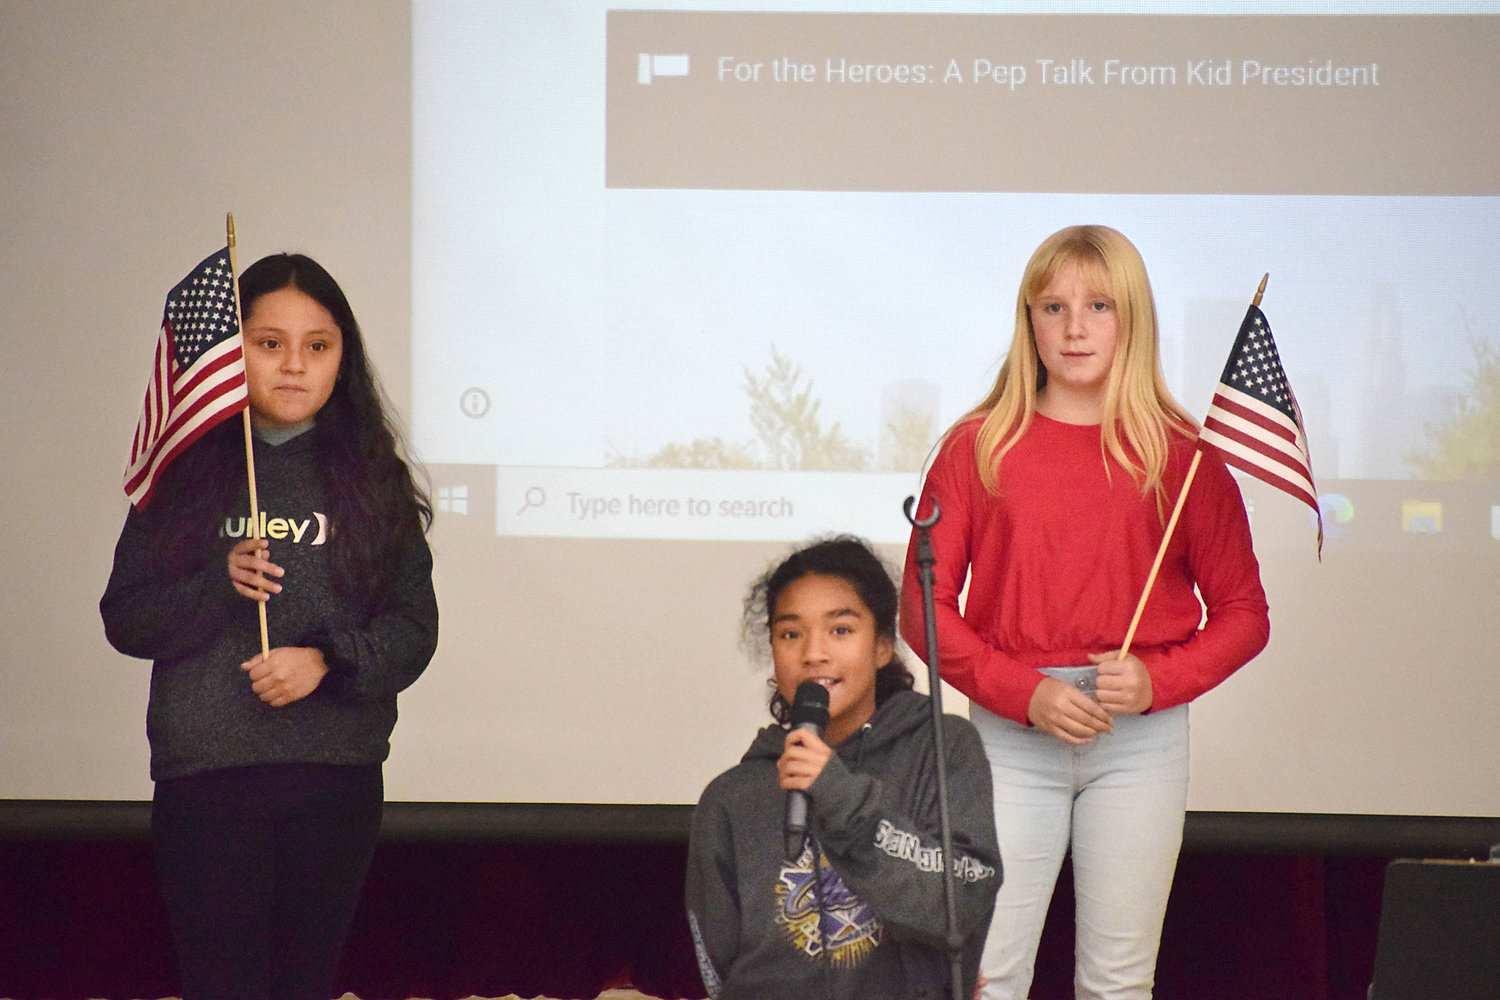 Herkimer Elementary School students Cassey Vintimilla and Zoey Slowik were flag holders and Maliyah Brown led the group in The Pledge of Allegiance Wednesday during a respect-themed assembly.